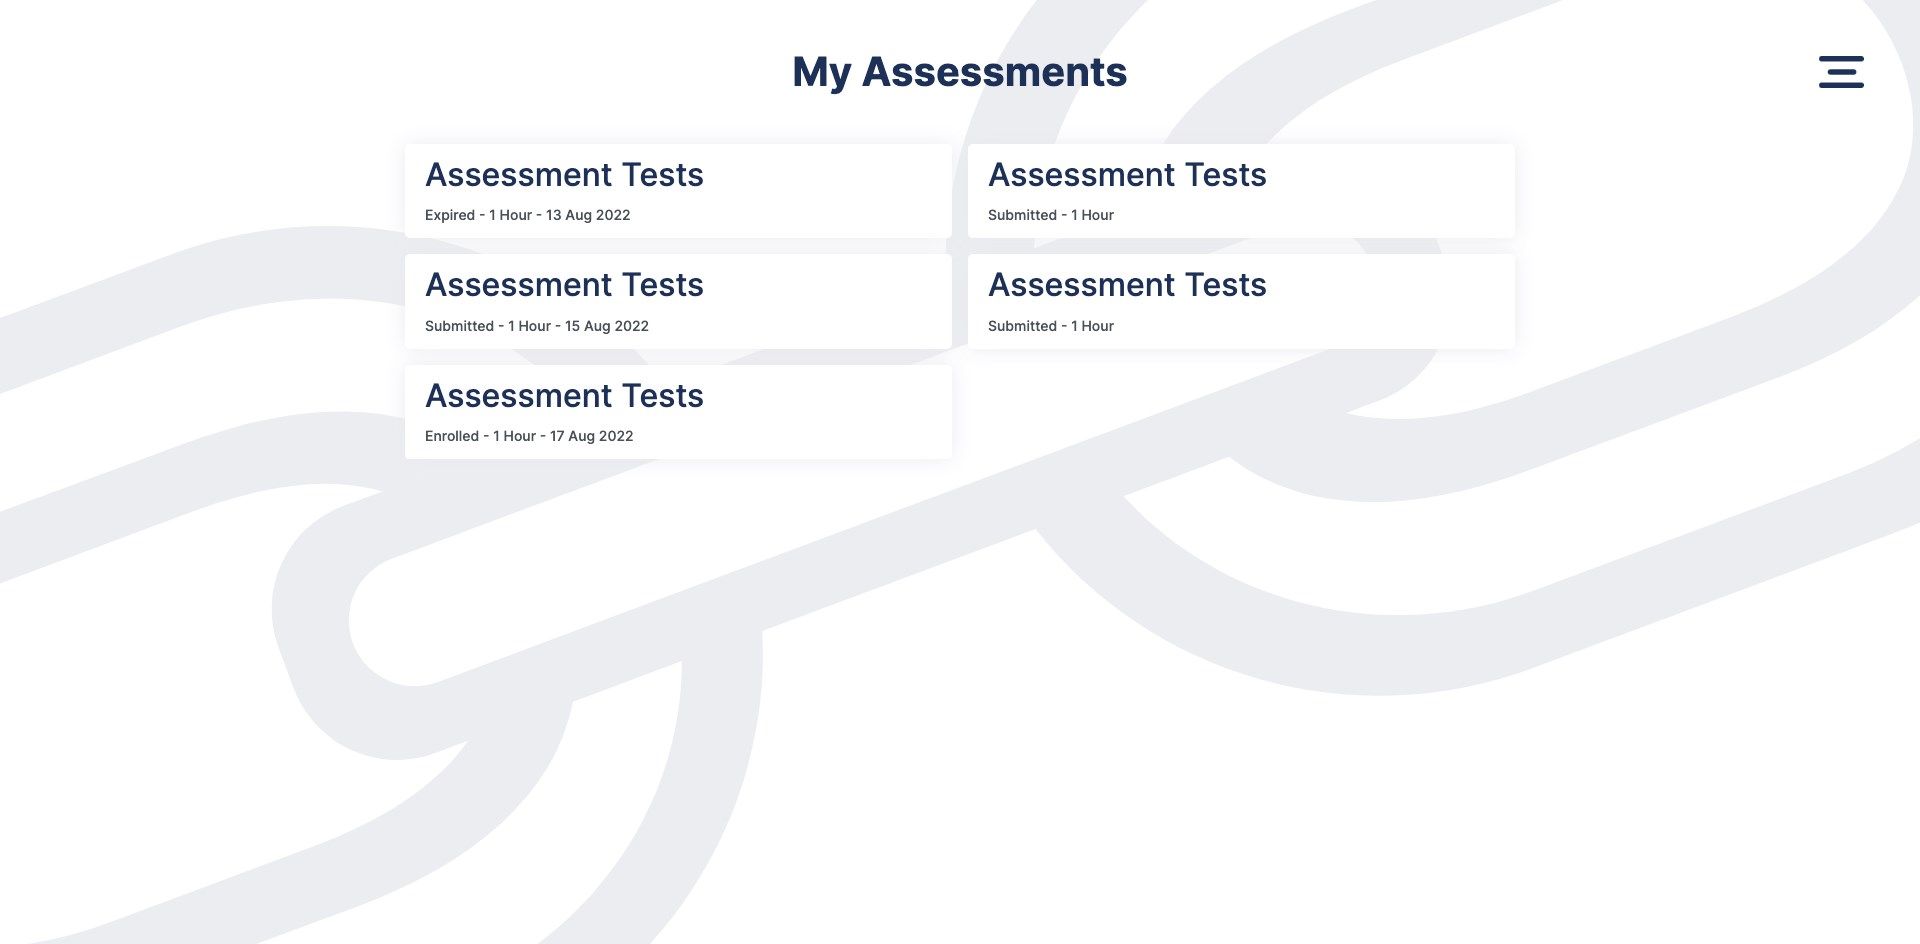 List of Assessments available to user